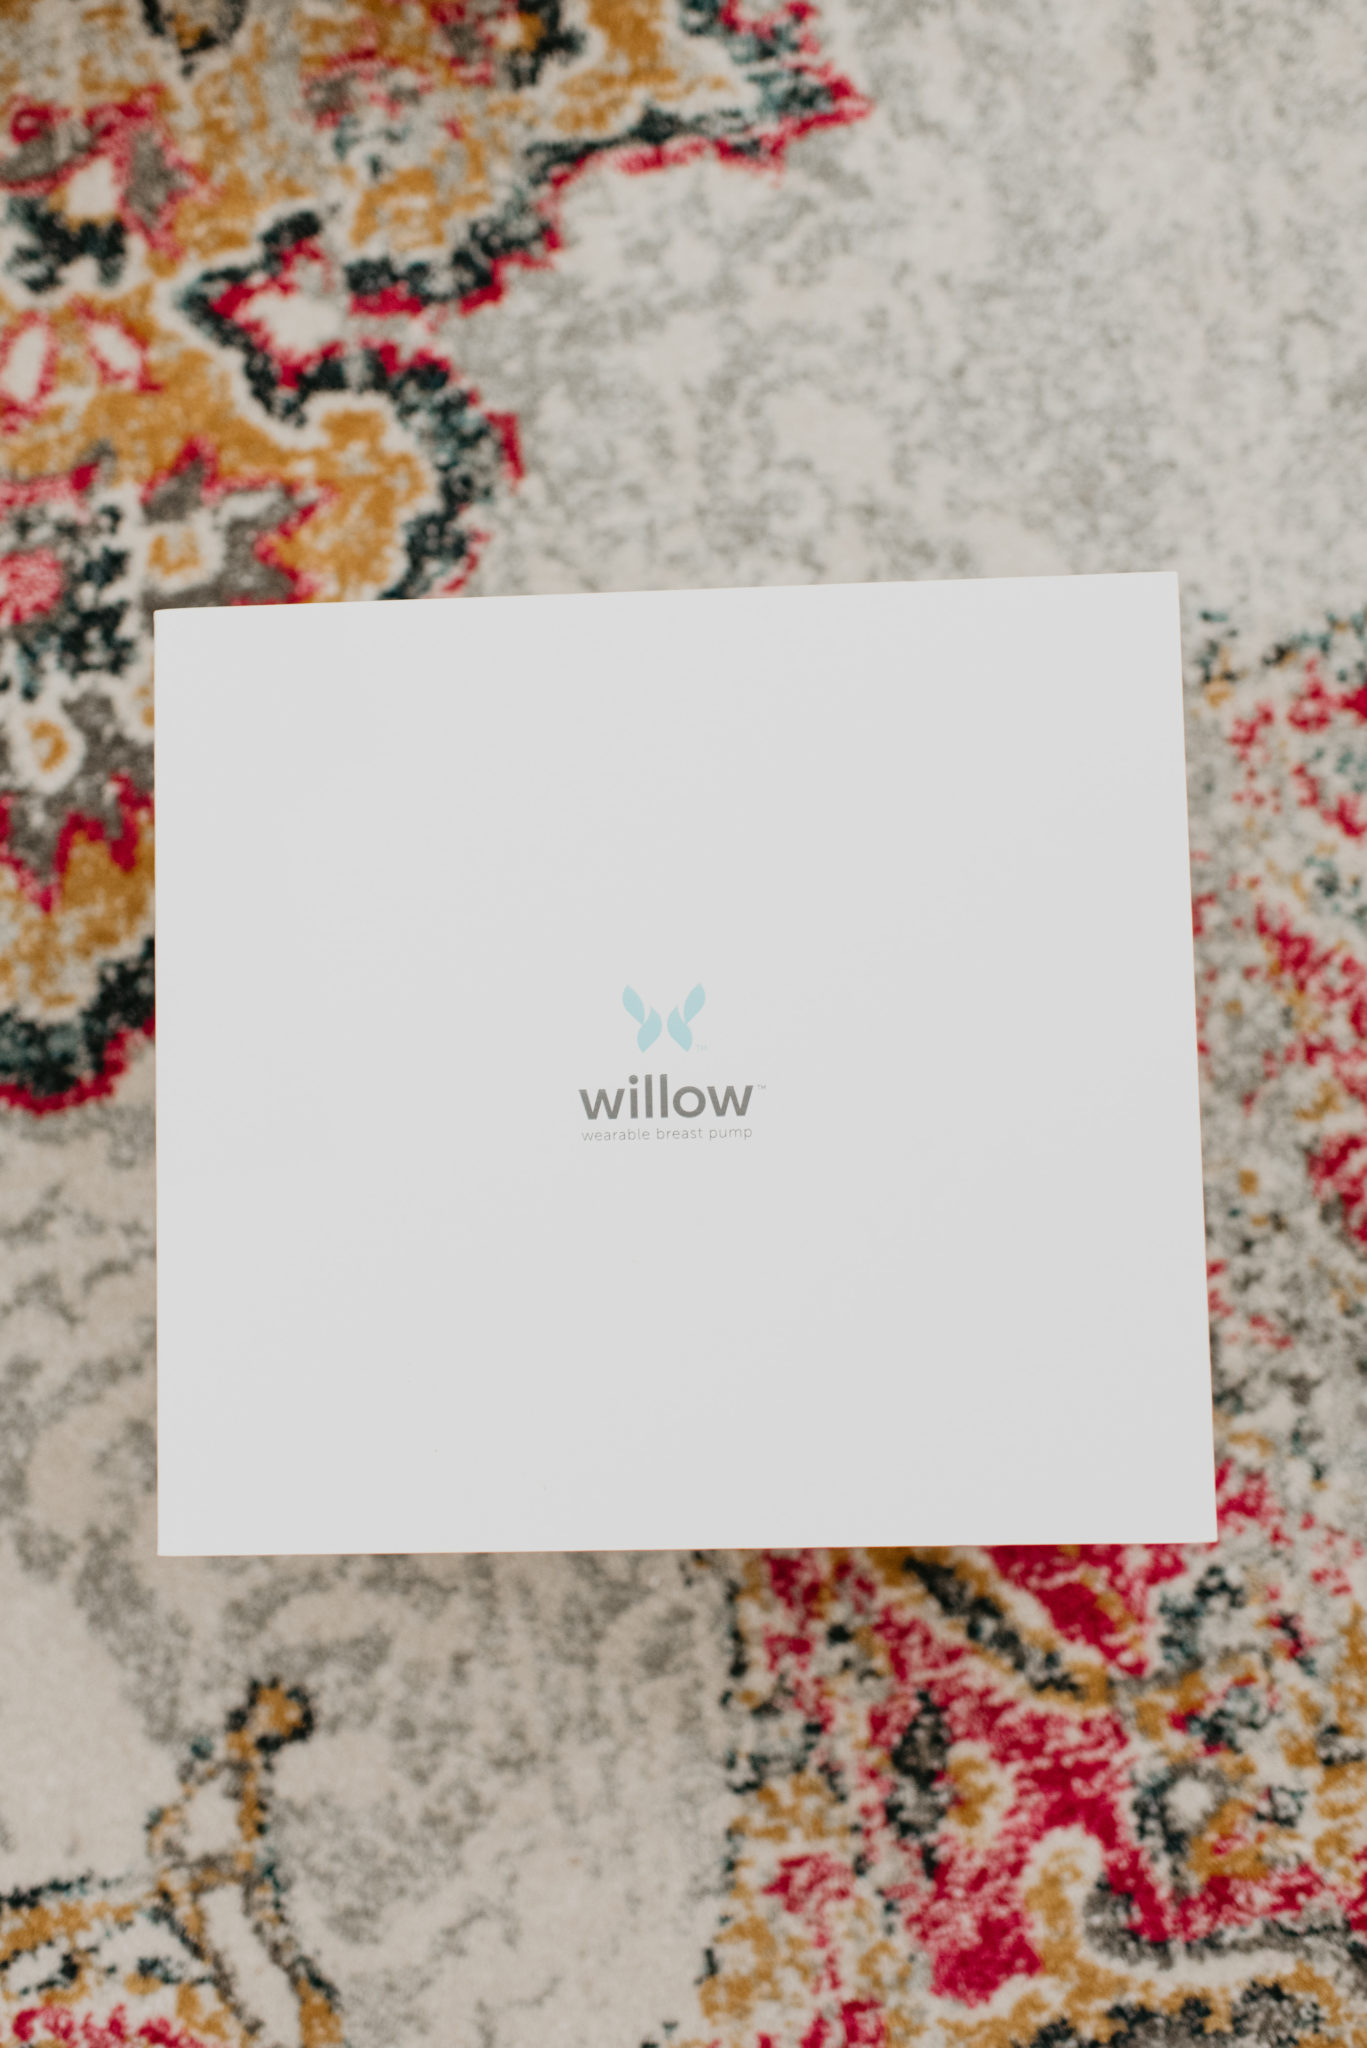 Willow Pump Review featured by Las Vegas mommy blogger, Outfits & Outings